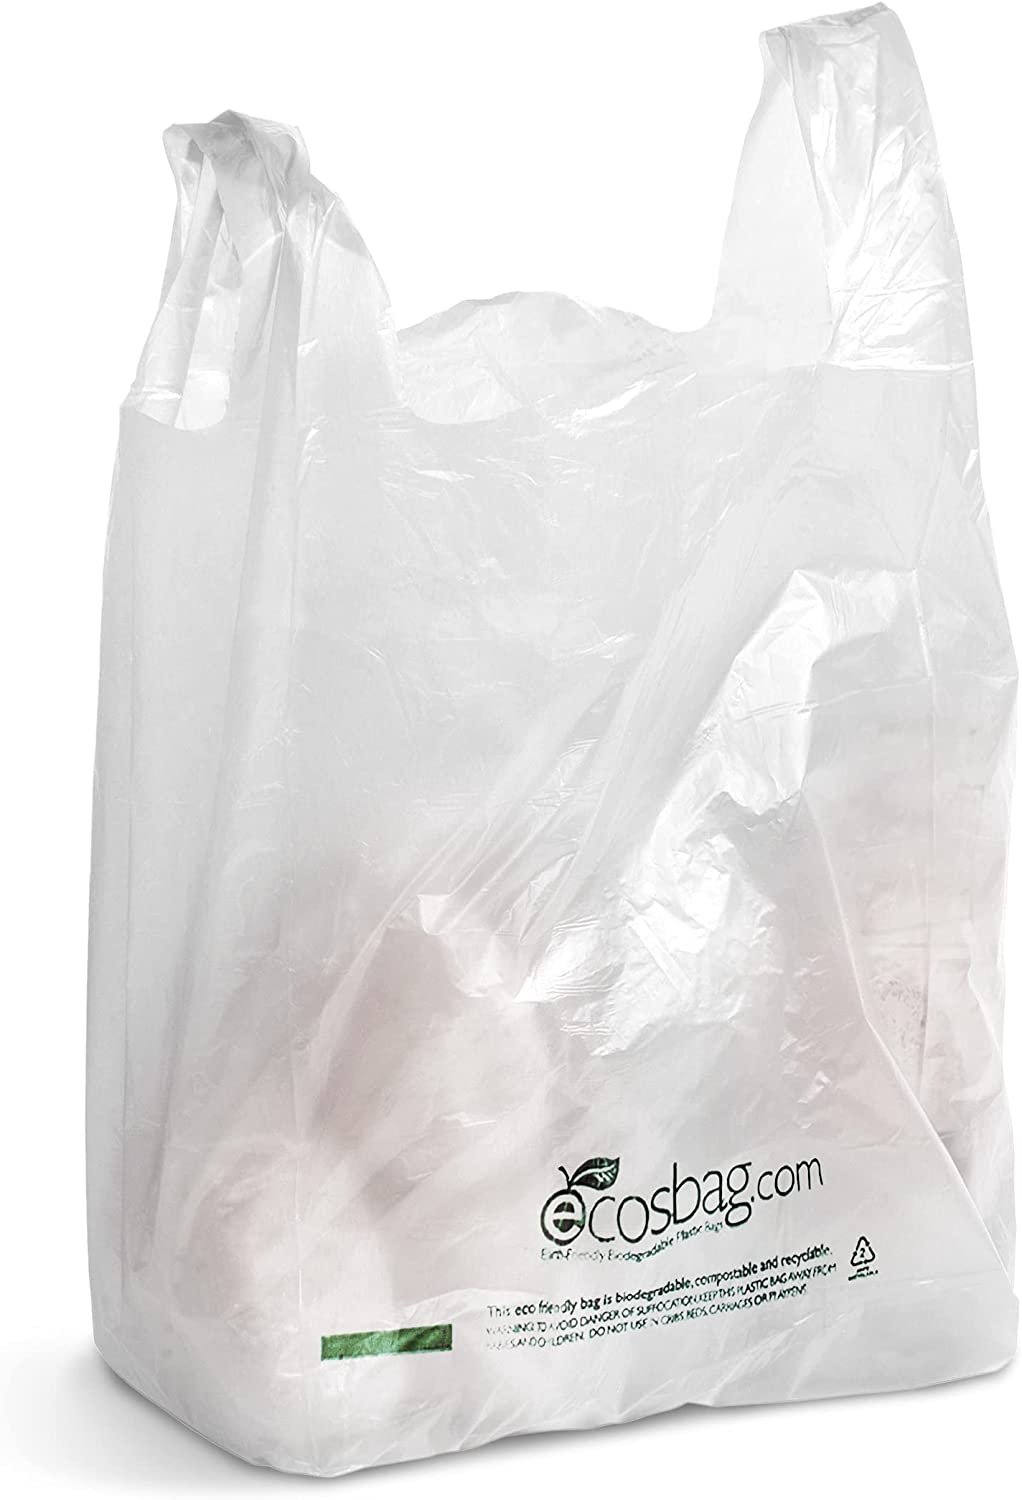 Pack of 1000 Earth Friendly Grocery Bags, White 11.5 x 6.5 x 21.